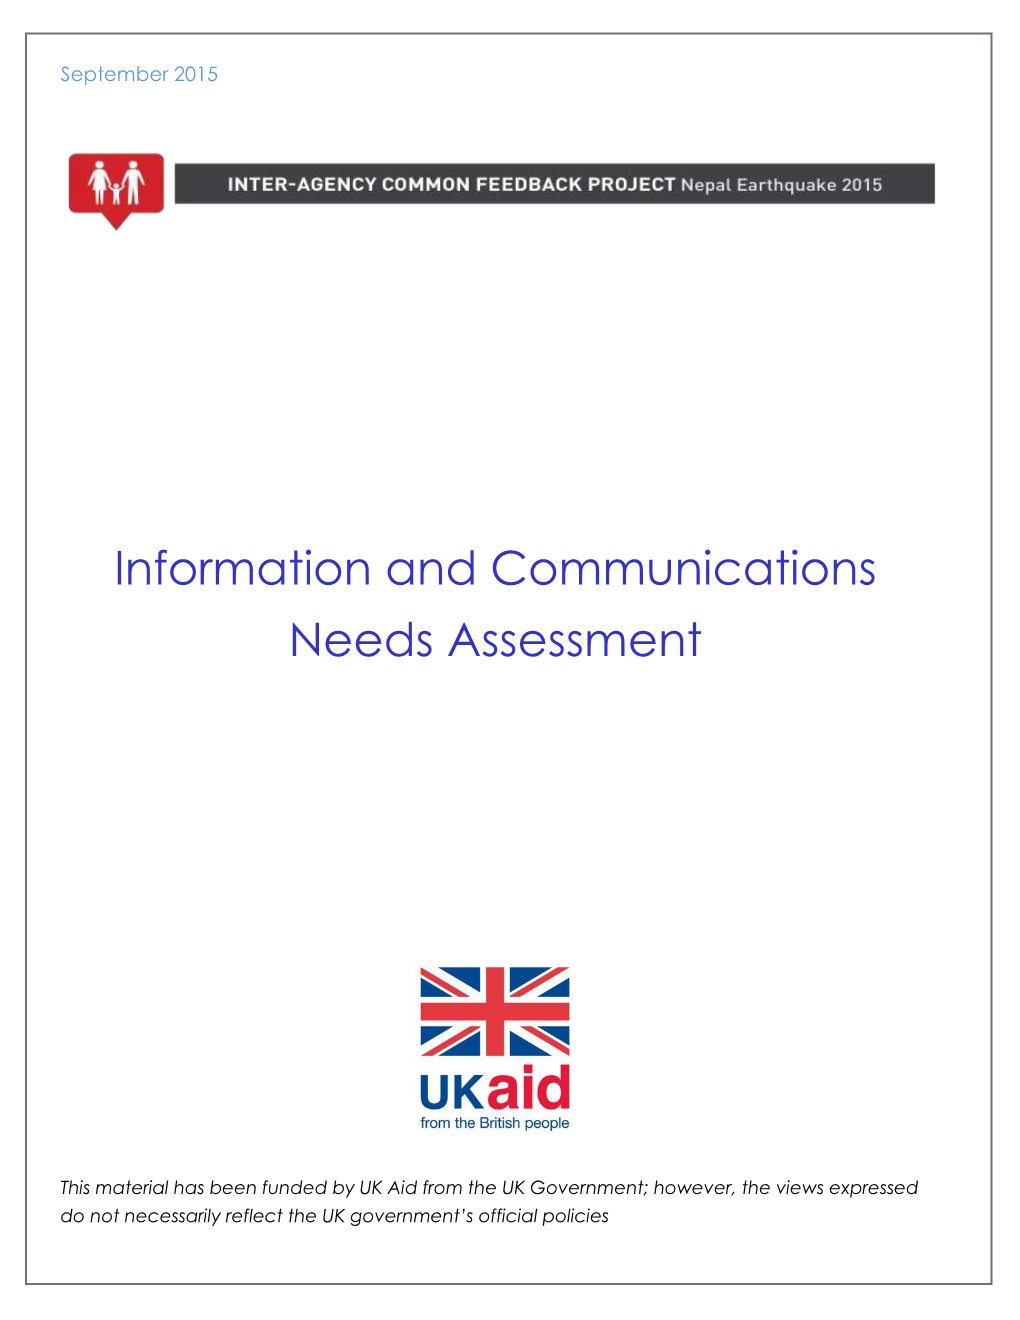 Information and Communications Needs Assessment